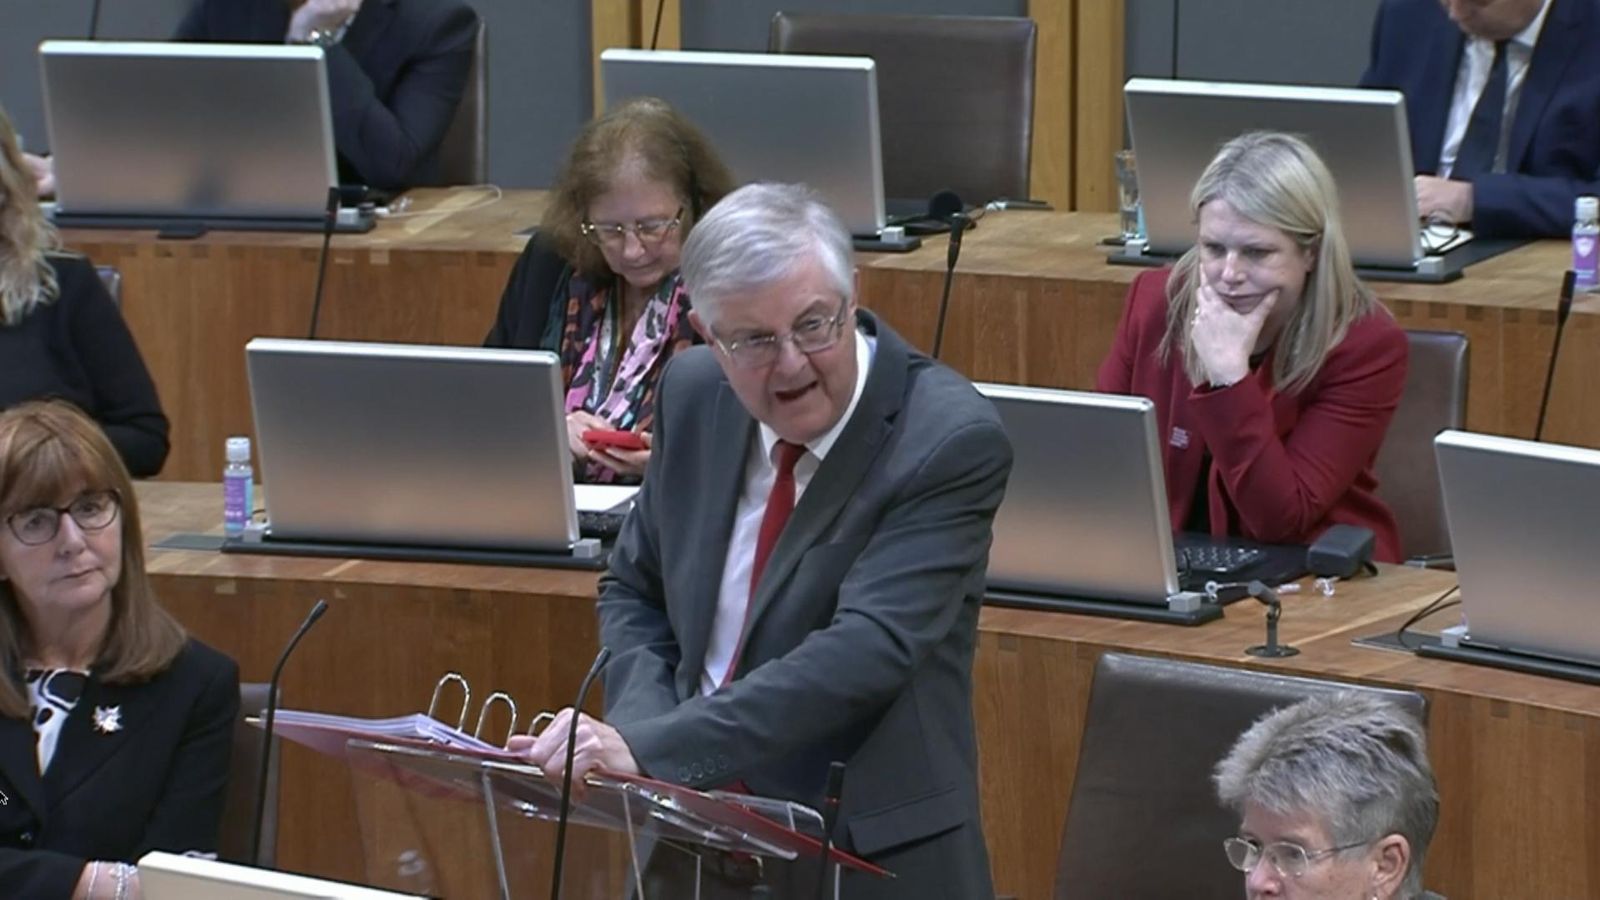 Wales' First Minister Mark Drakeford loses temper with Tories as he accuses them of making mess of UK's budget and reputation